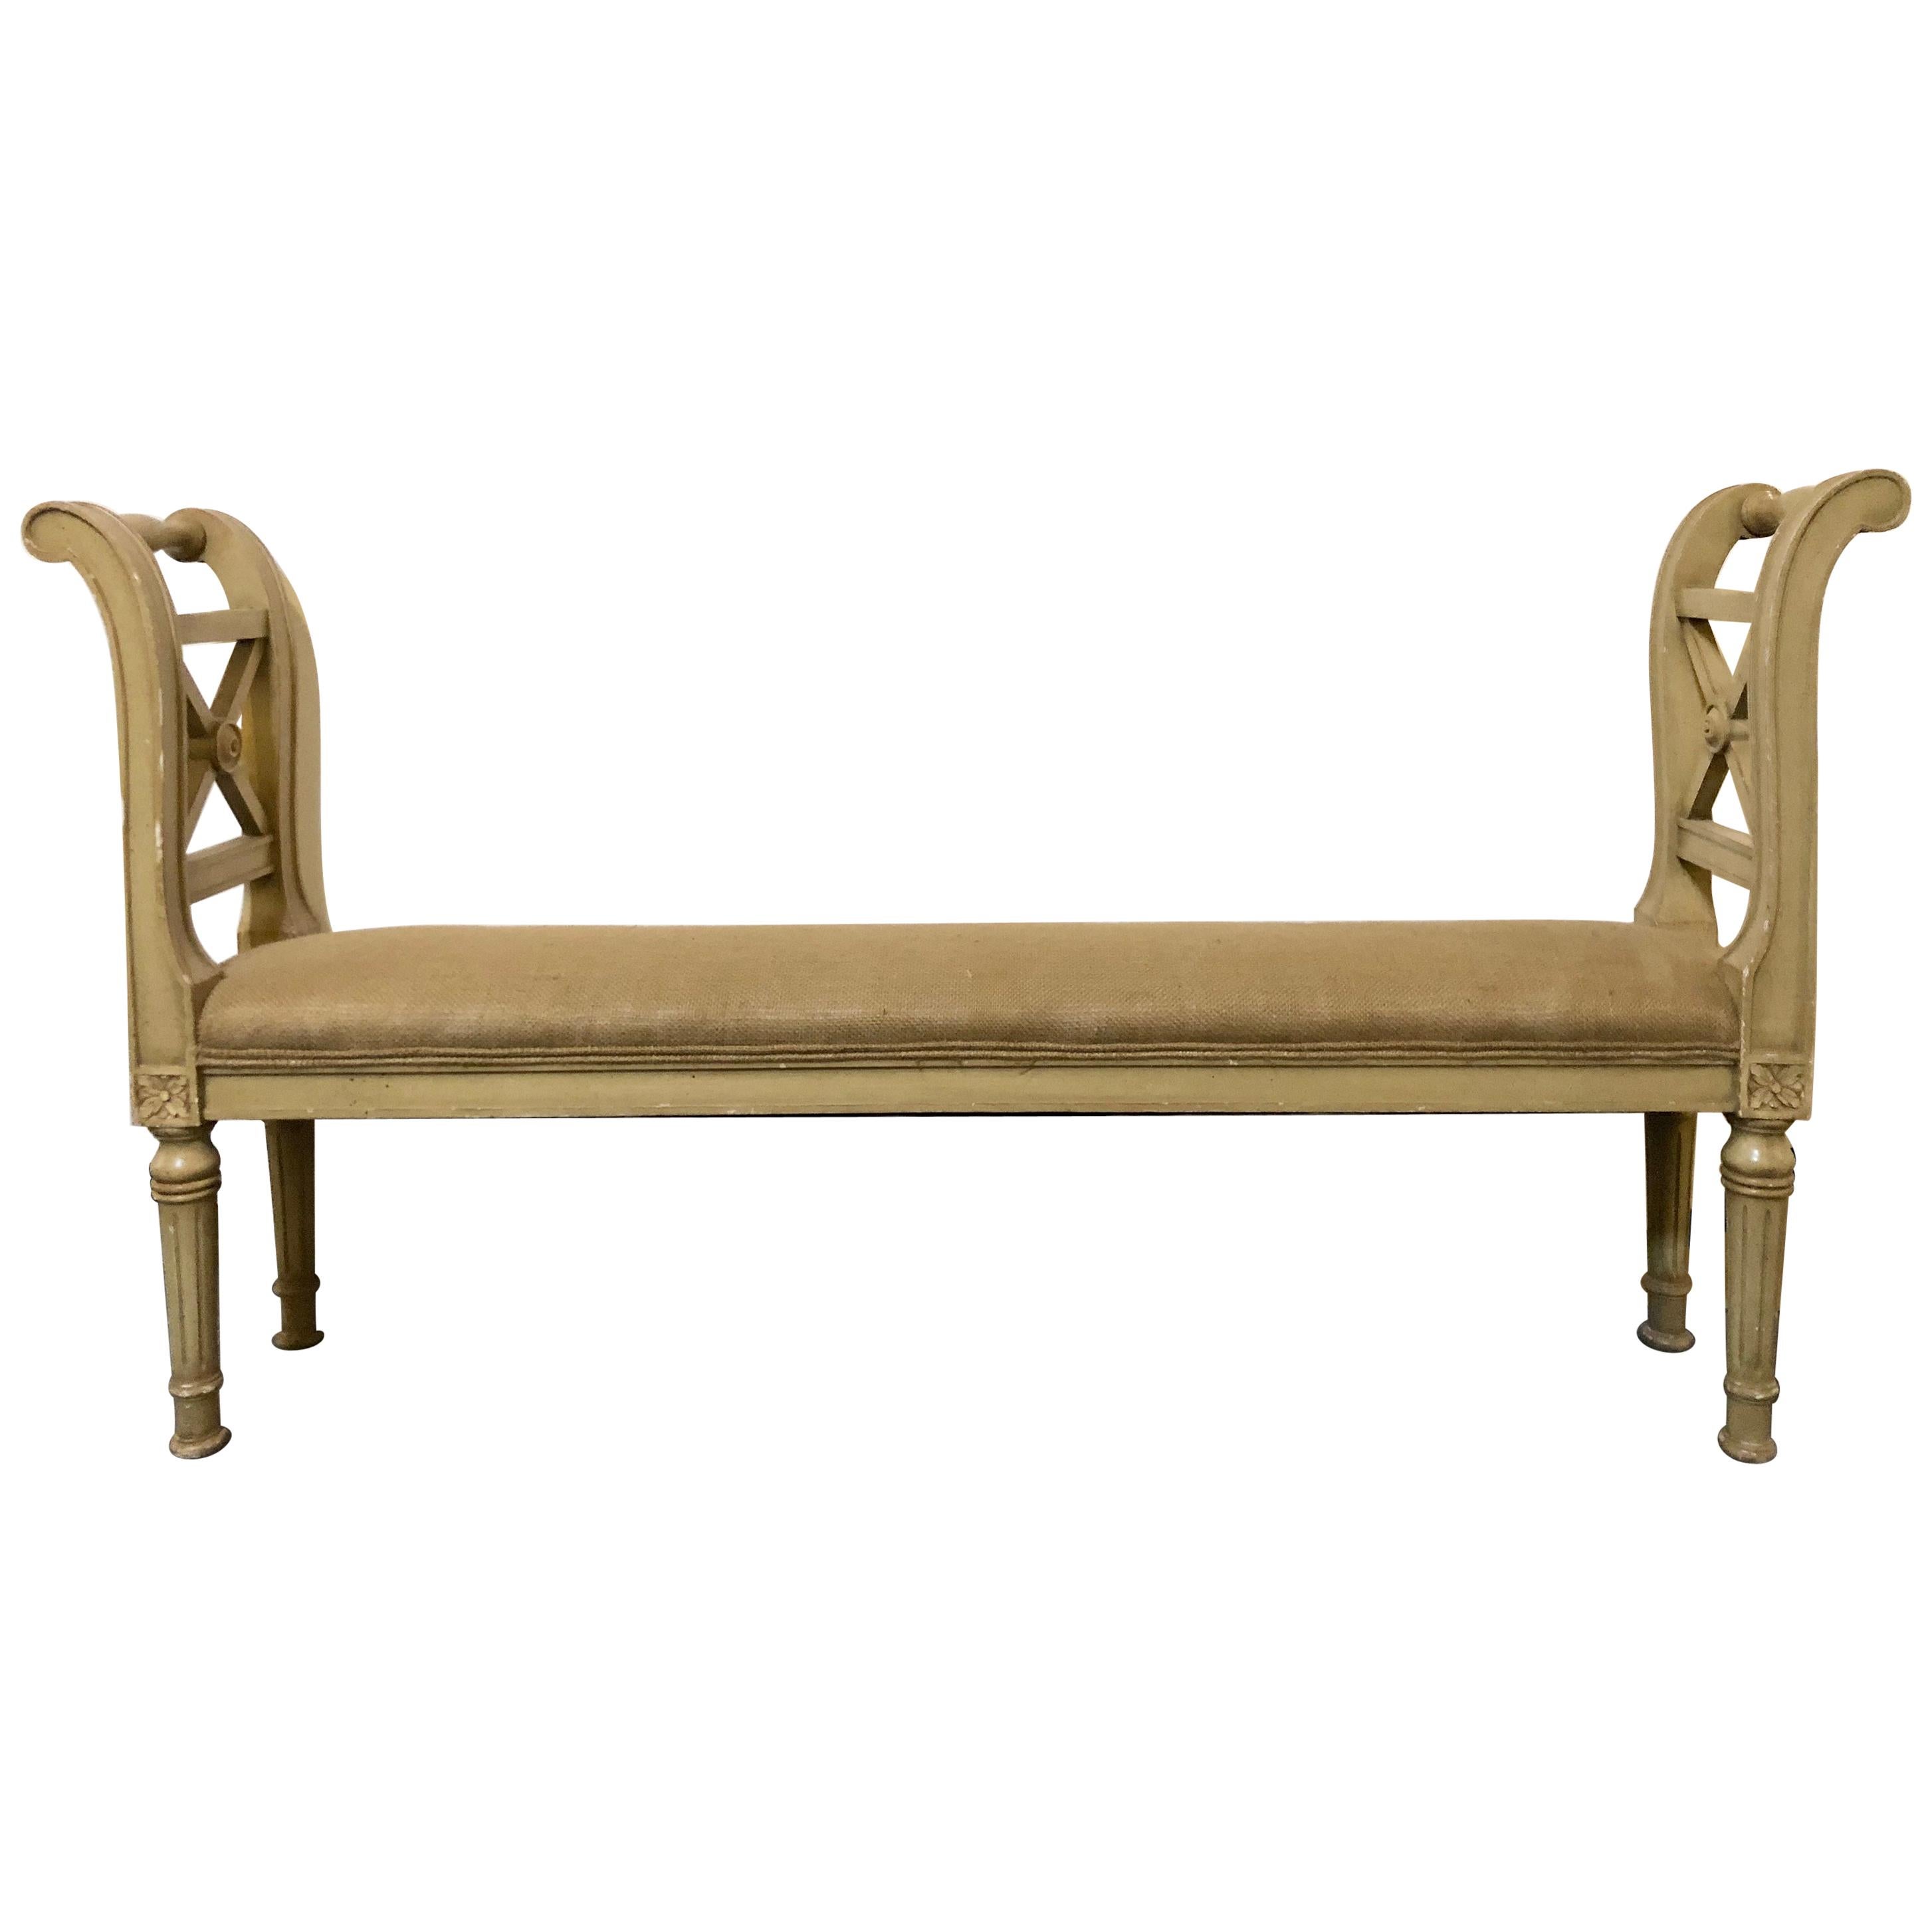 Louis XVI Style Window Seat Bench Paint Decorated Green with Burlap Upholstery